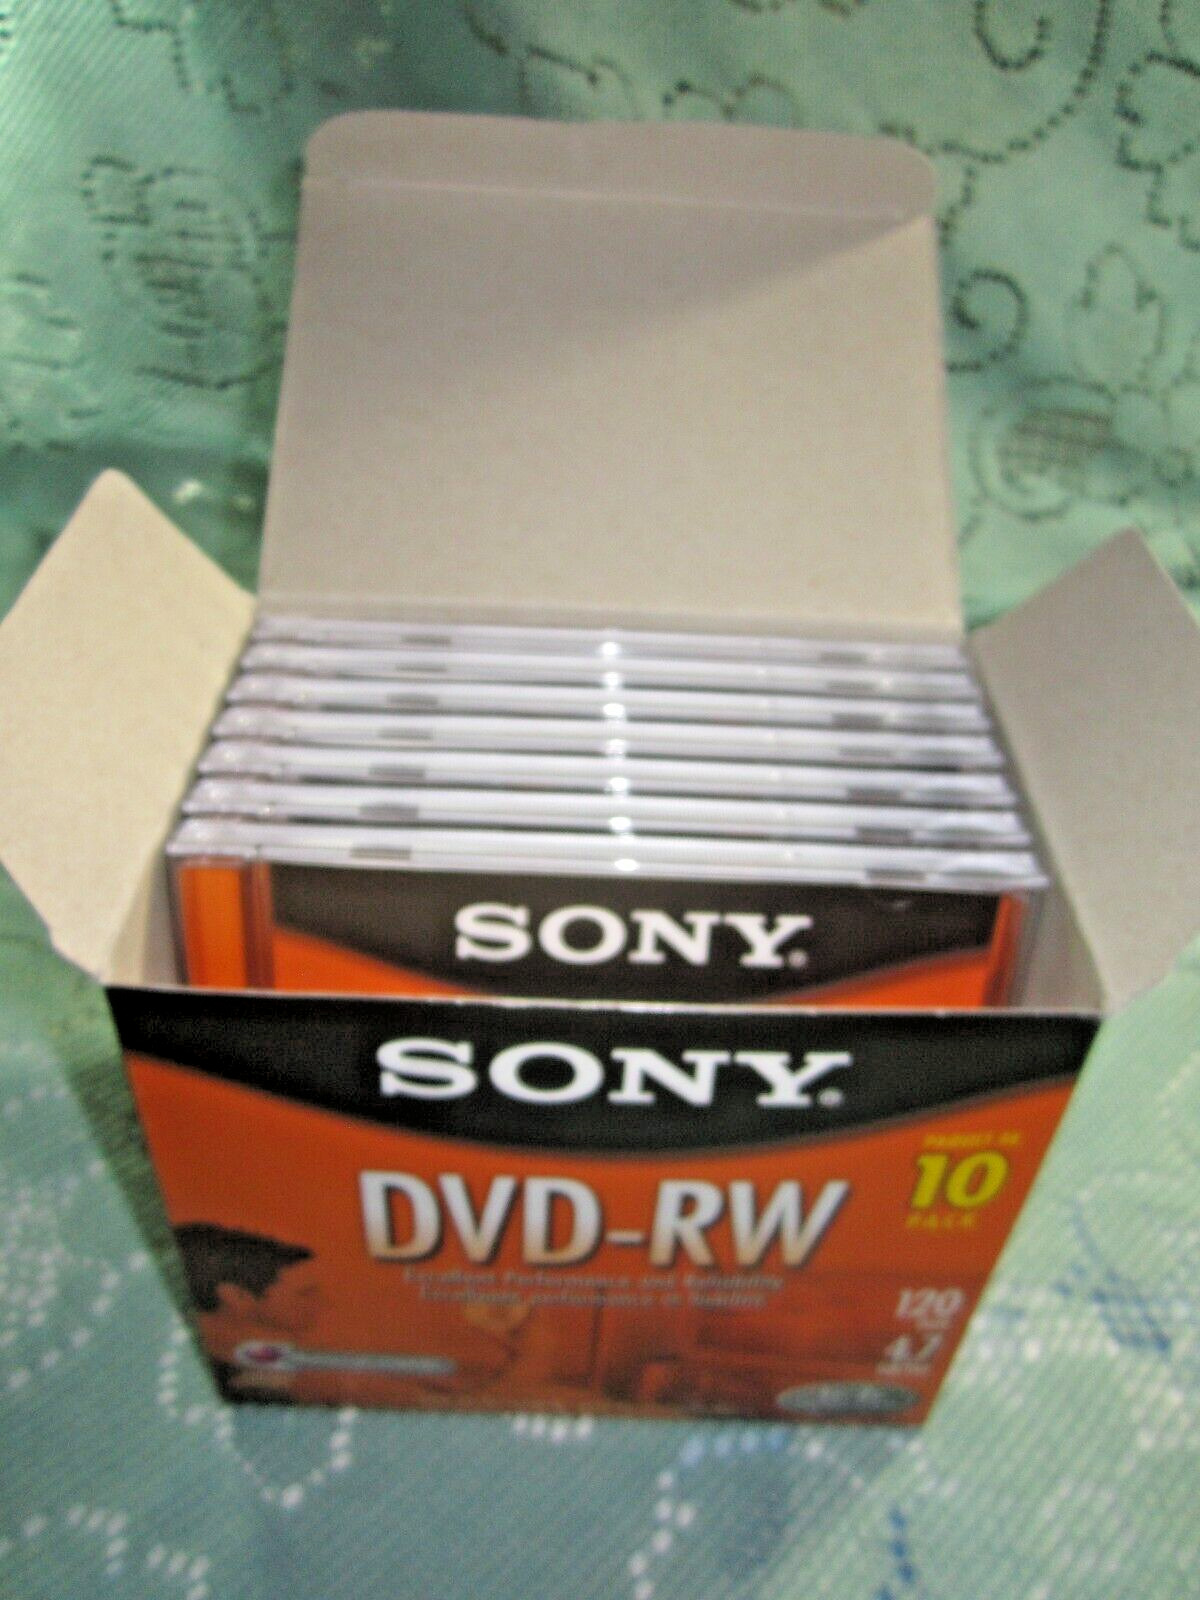 Sony DVD-RW Recordable DVD 4.7GB 120 Min Open Box 7 Packs With Cases New